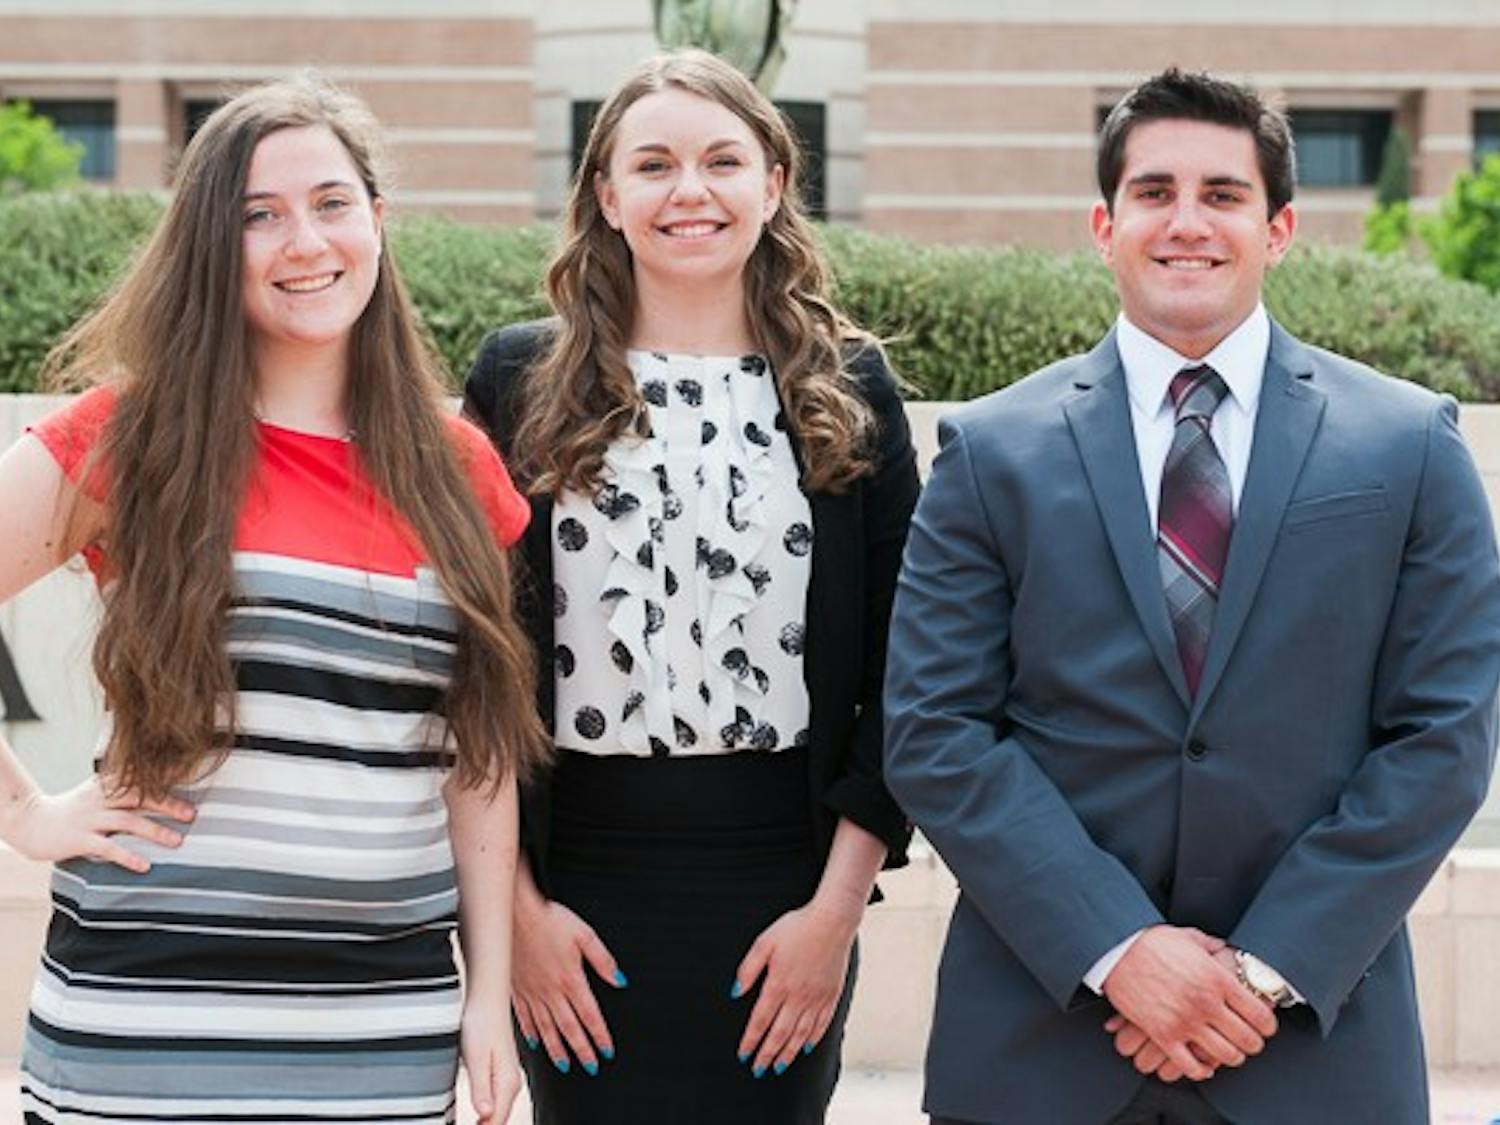 Vice President of Policy candidate Rachael Tashbook (left), presidential candidate Stephanie Bockrath and Vice President of Services candidate Joseph Muzupappa pose for a portrait on Wednesday, March 18, 2015 on the West campus. The three are running together as one executive ticket in this year's USG West election.